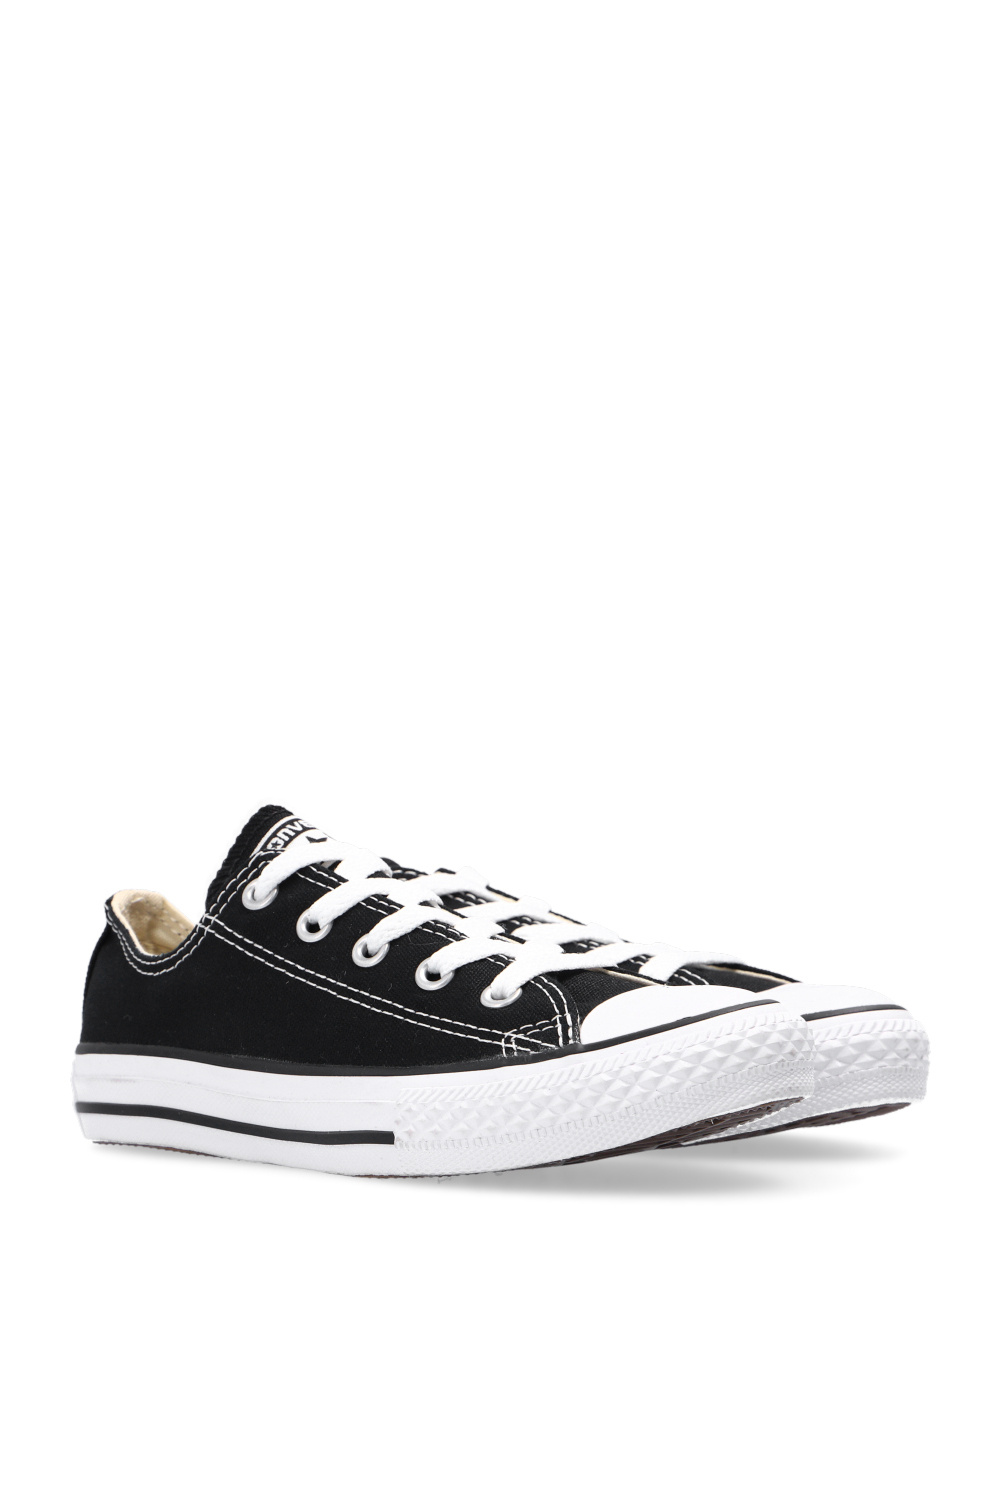 Converse Kids ‘Chuck Taylor All Star’ sneakers | Kids's Kids shoes (25 ...